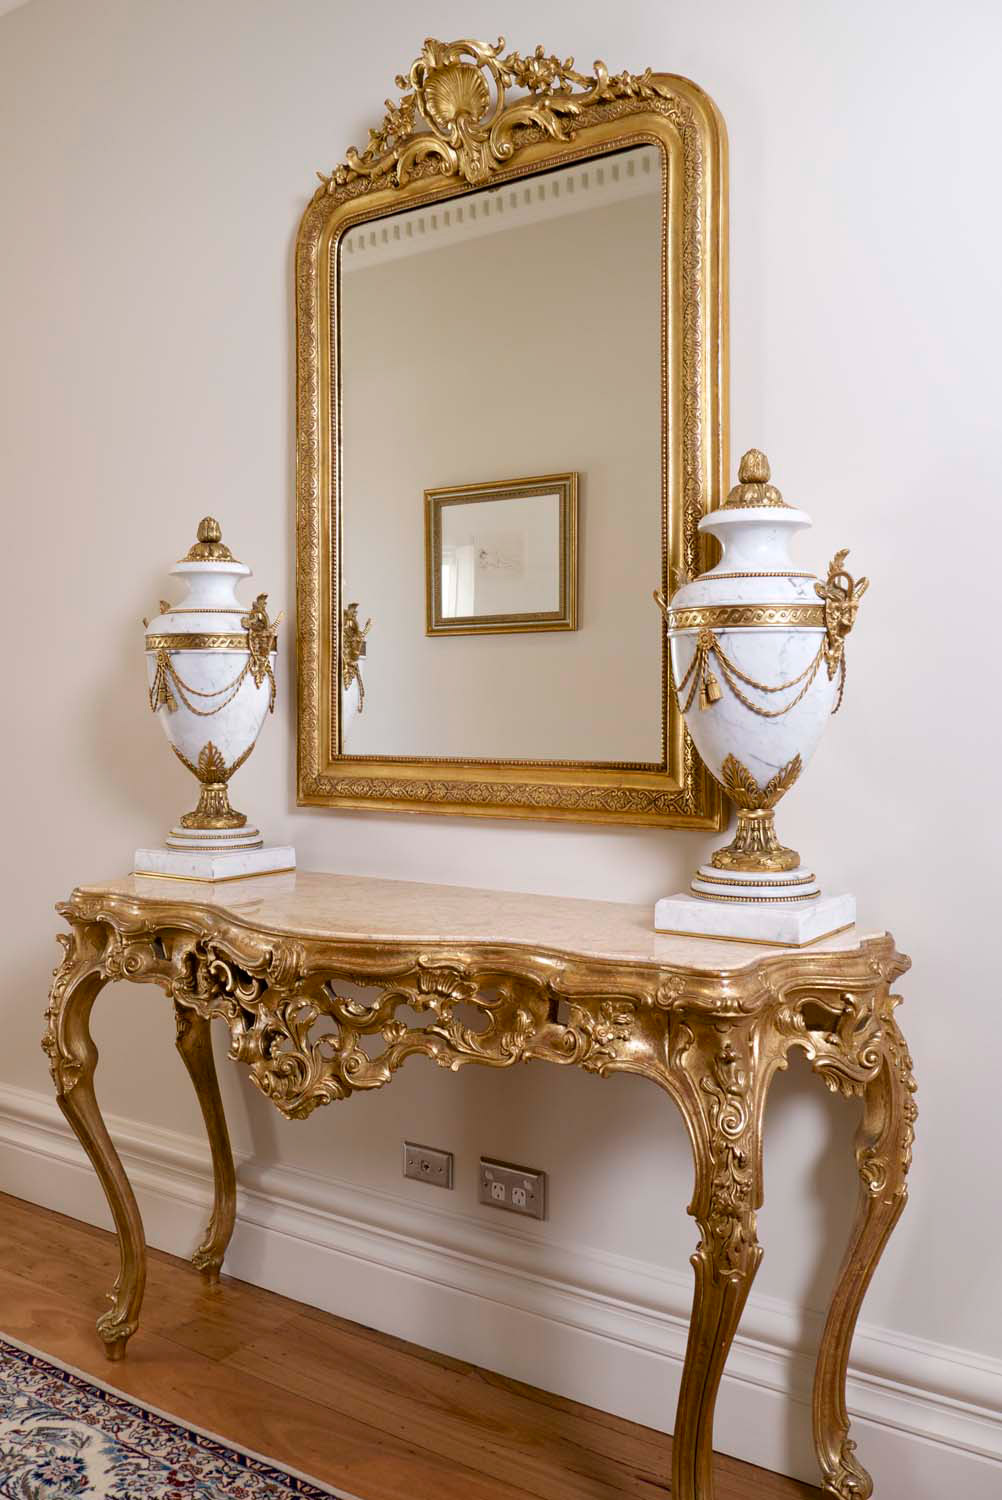 1 Classic french style hall table with mirror, décor and rug in hallway with gilding